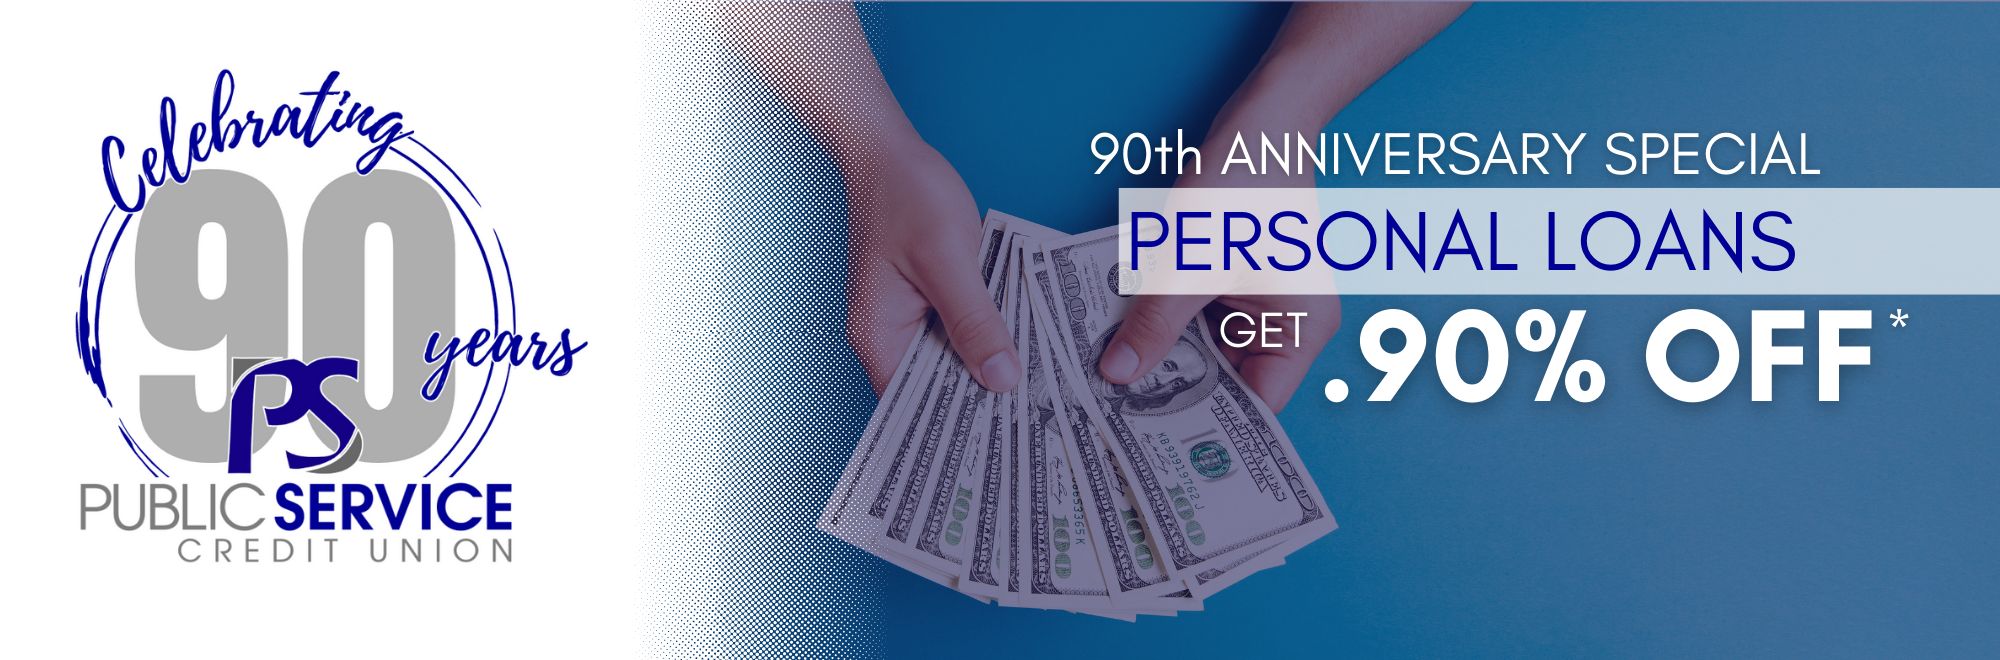 90th anniversary special Personal Loans get .90% off